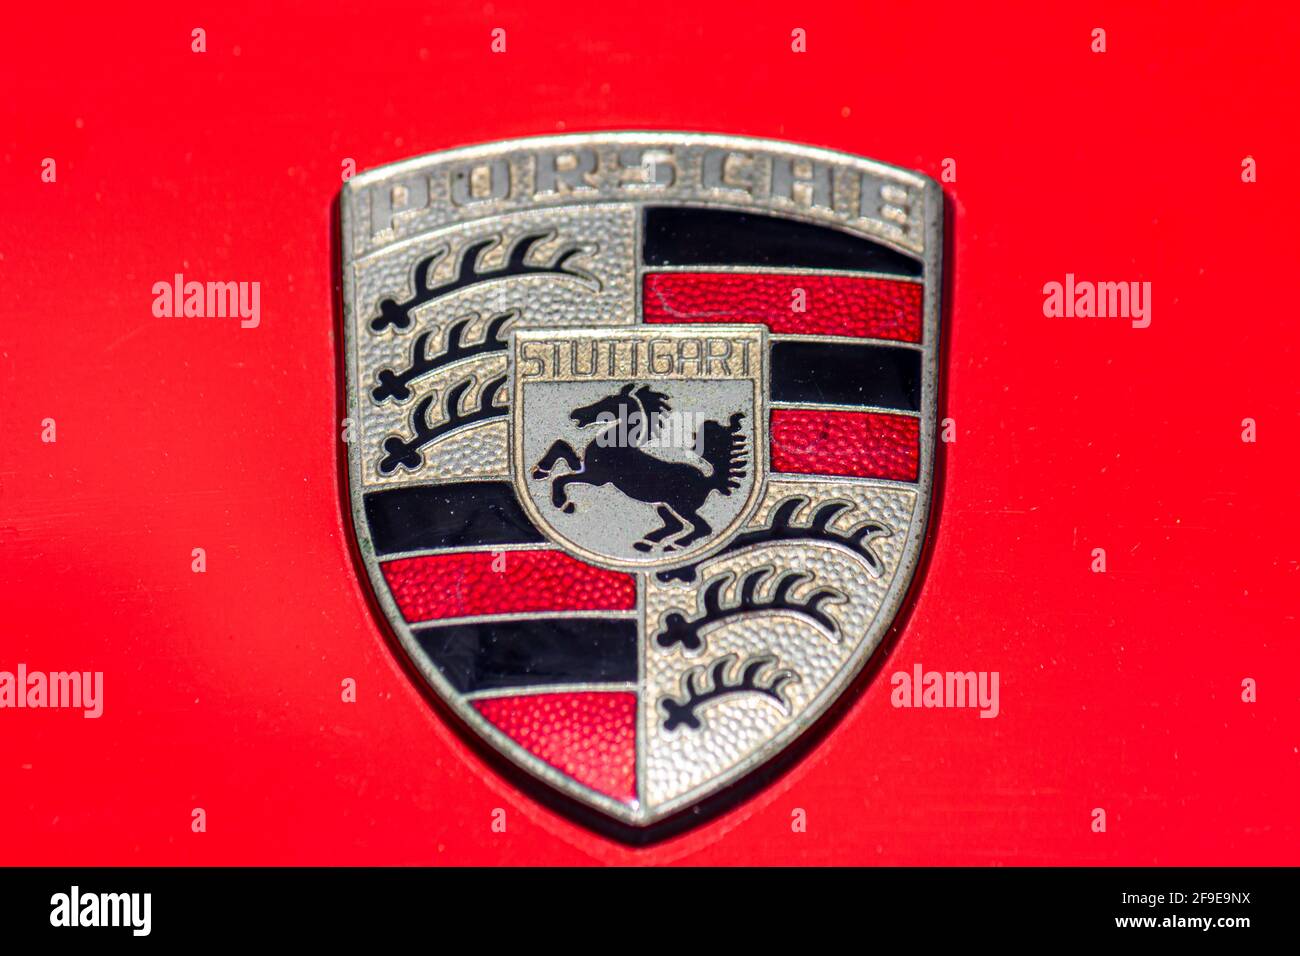 Original Porsche crest isolated on red background (car hood) Stock Photo